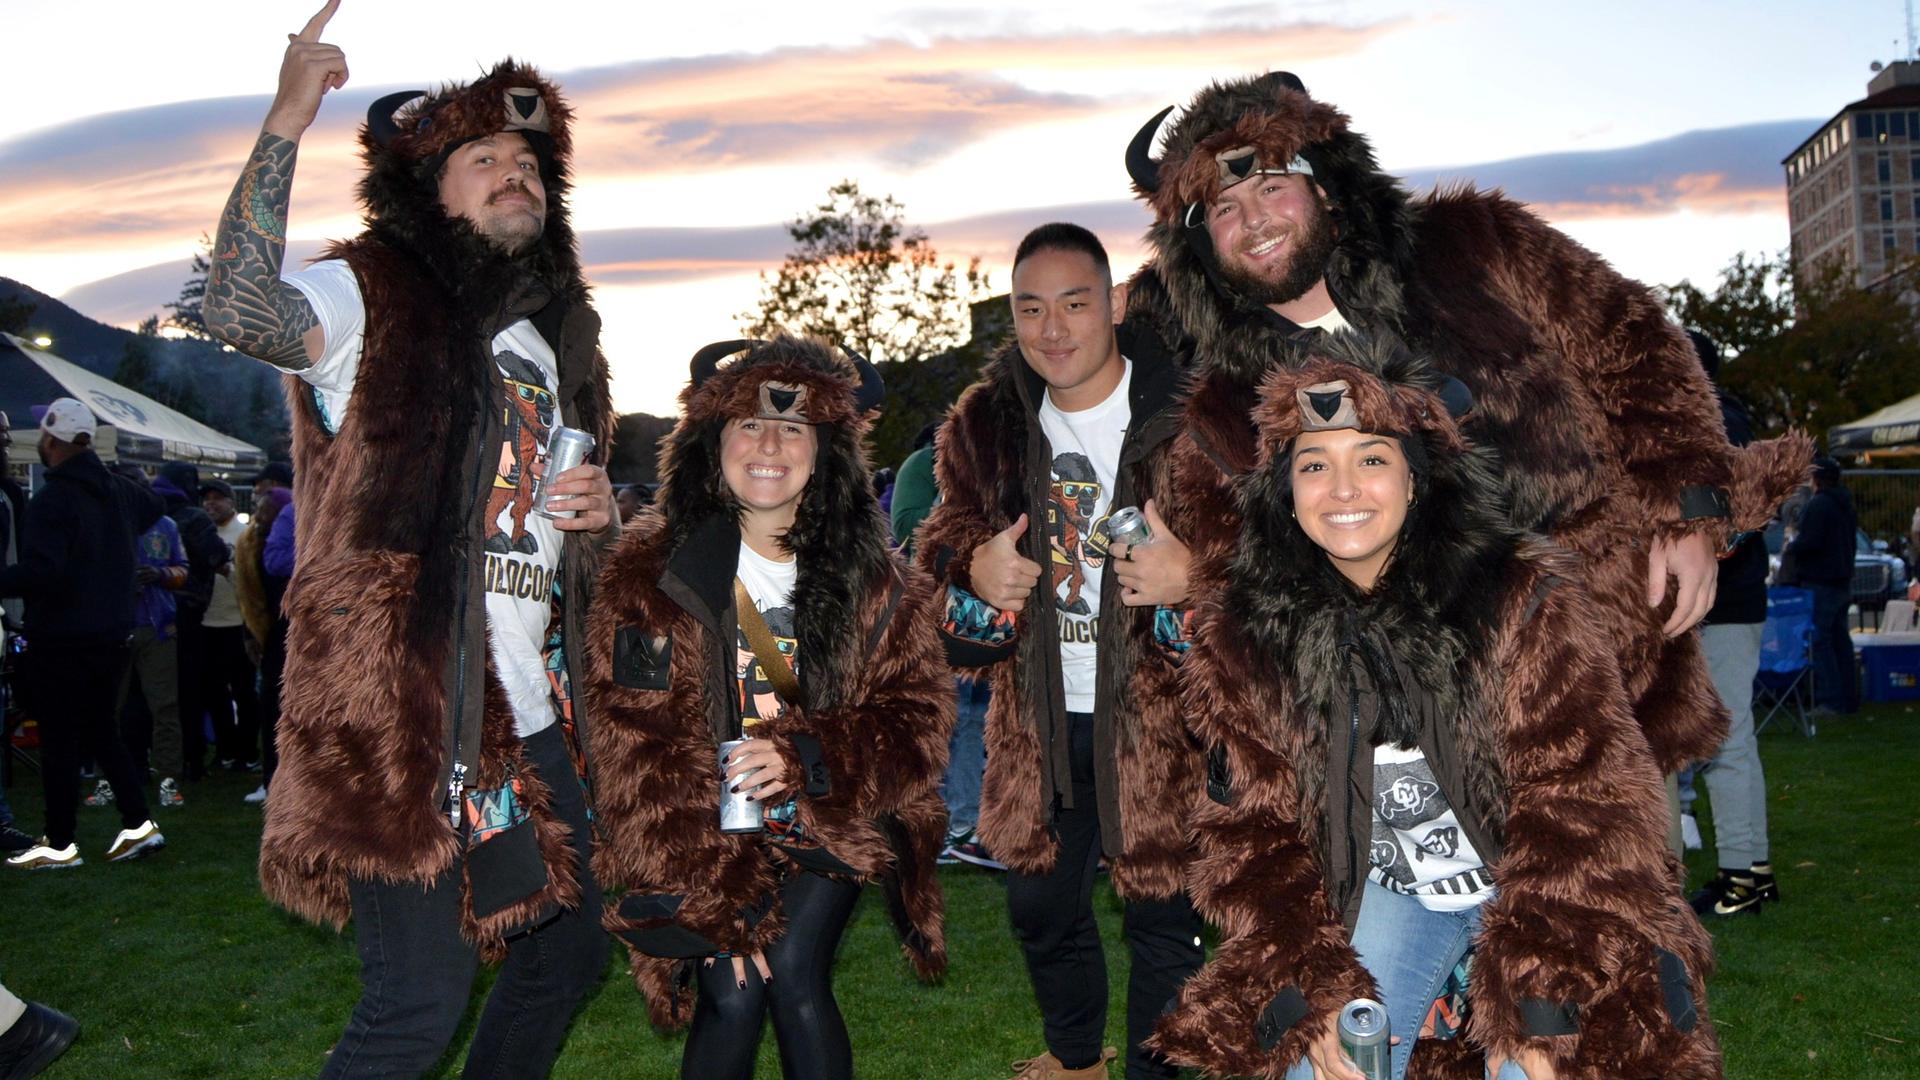 College students wearing bear costumes